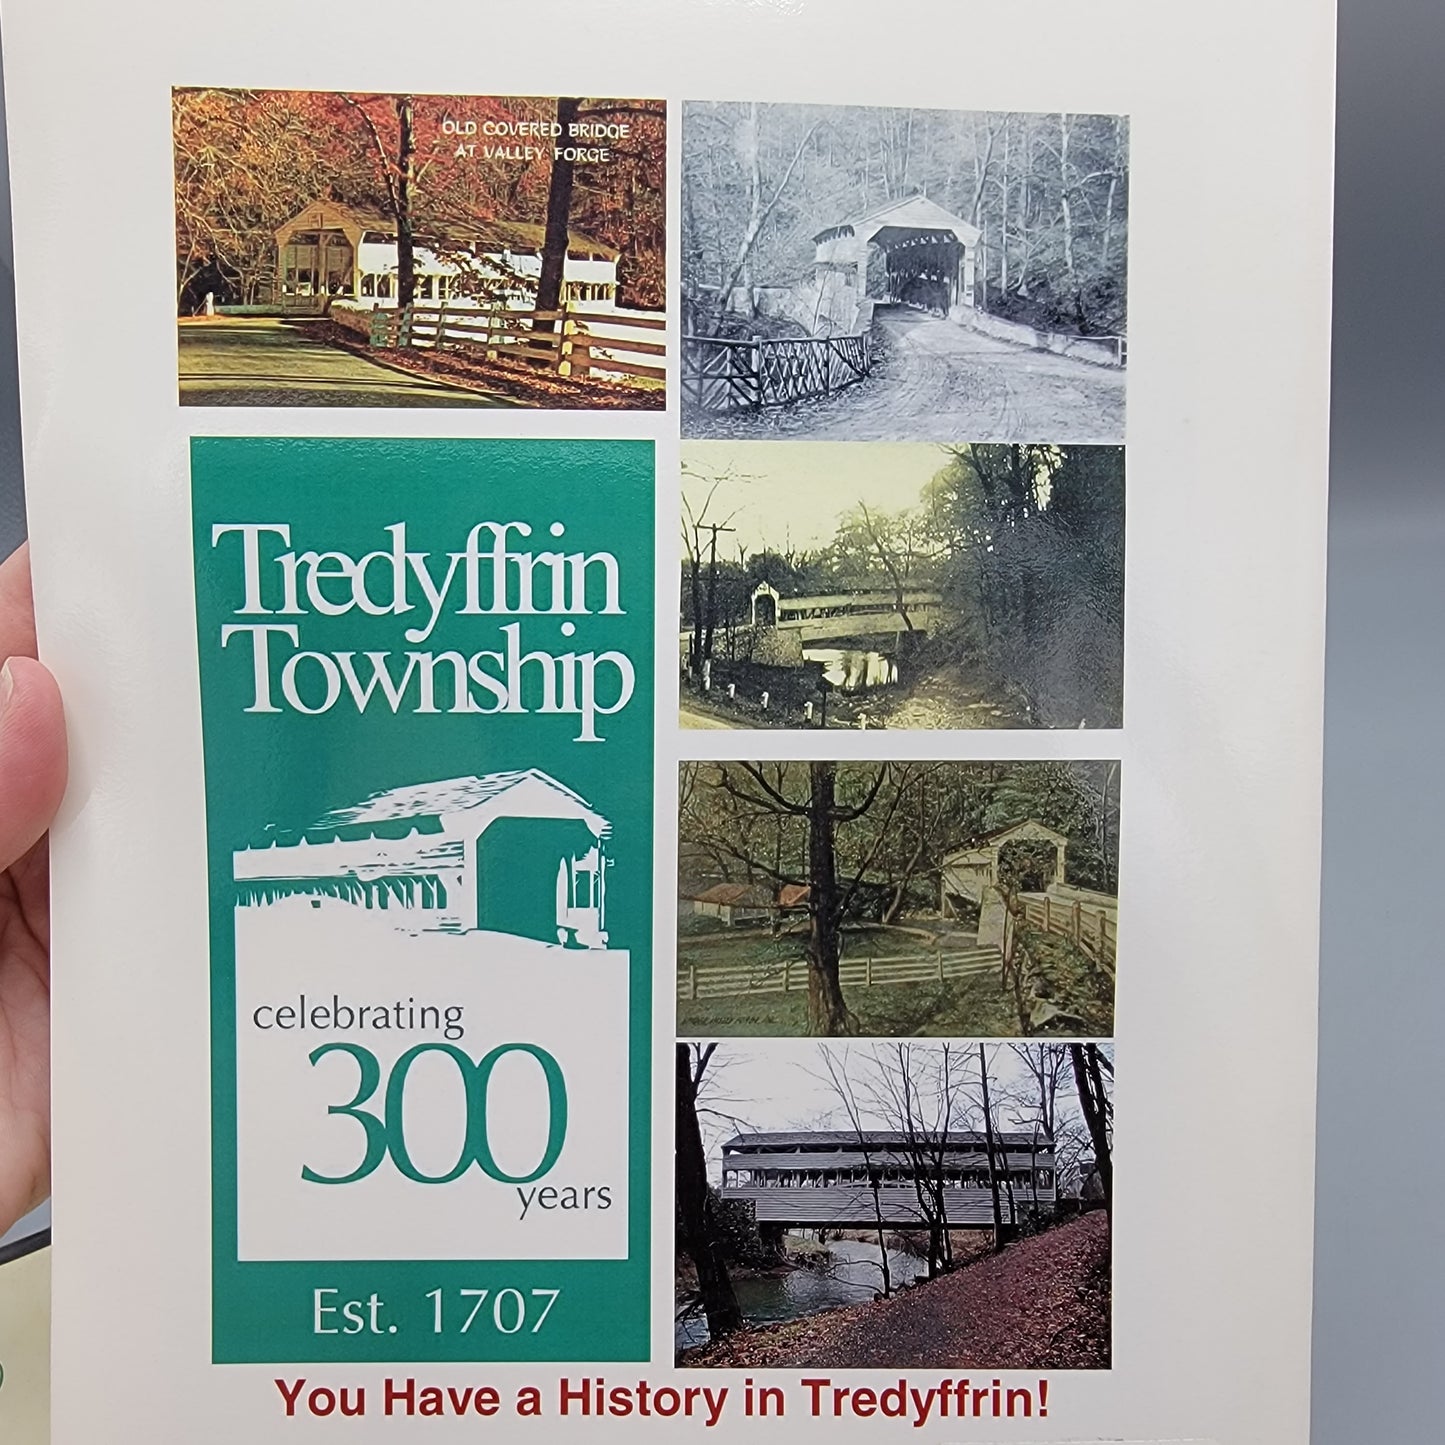 The History of Tredyffrin Township Book